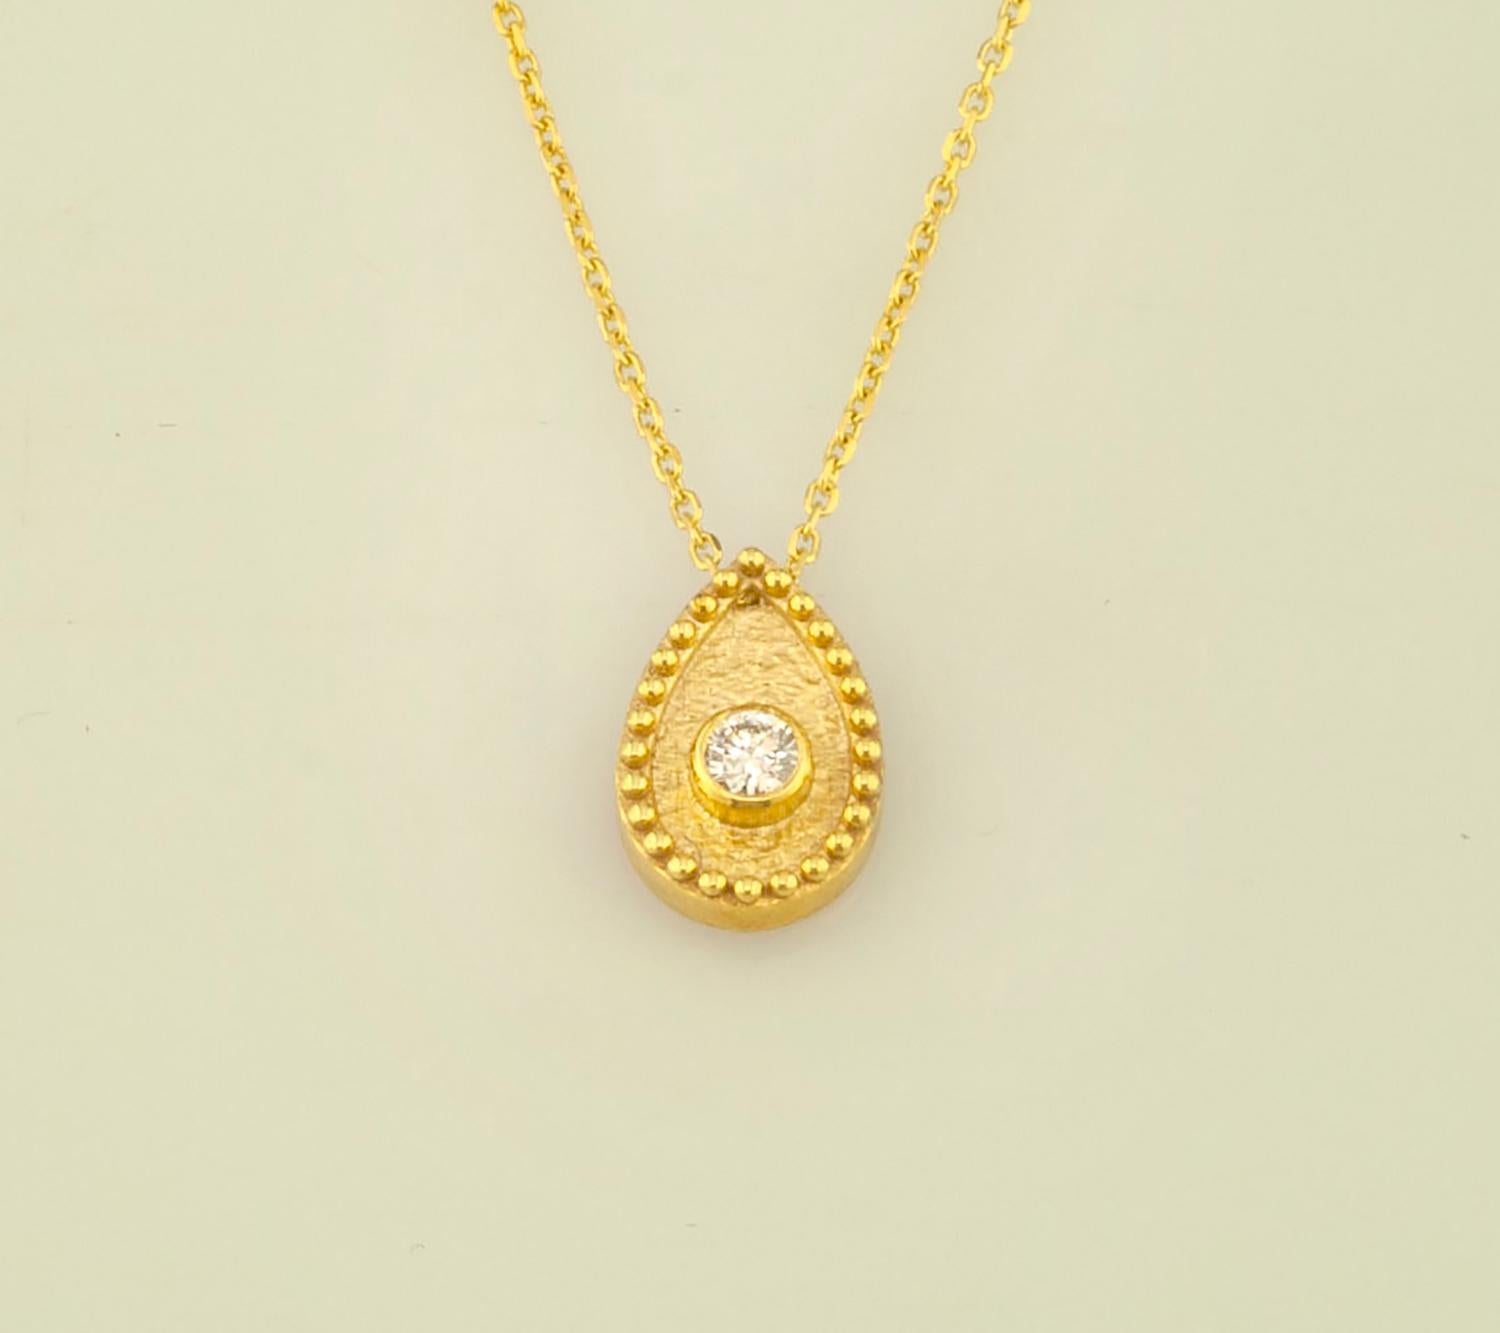 This S.Georgios designer pendant necklace is 18 Karat yellow gold and microscopically decorated with hand-made bead granulation workmanship, and finished with a unique velvet background look. This beautiful teardrop necklace features a brilliant-cut